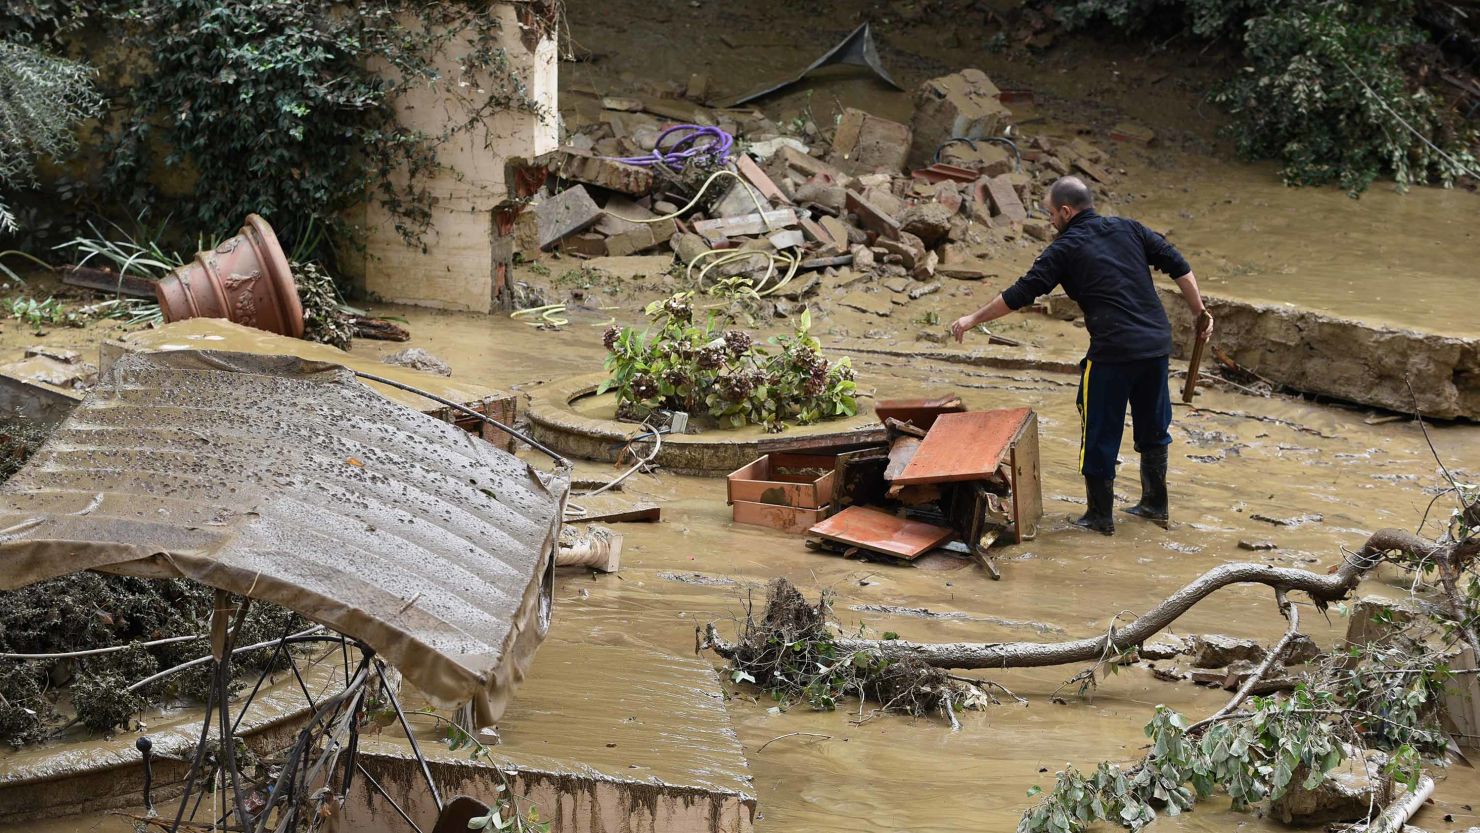 A man piles wrecked furniture outside his home in the Livorno area, flooded after heavy rain, on September 10, 2017.